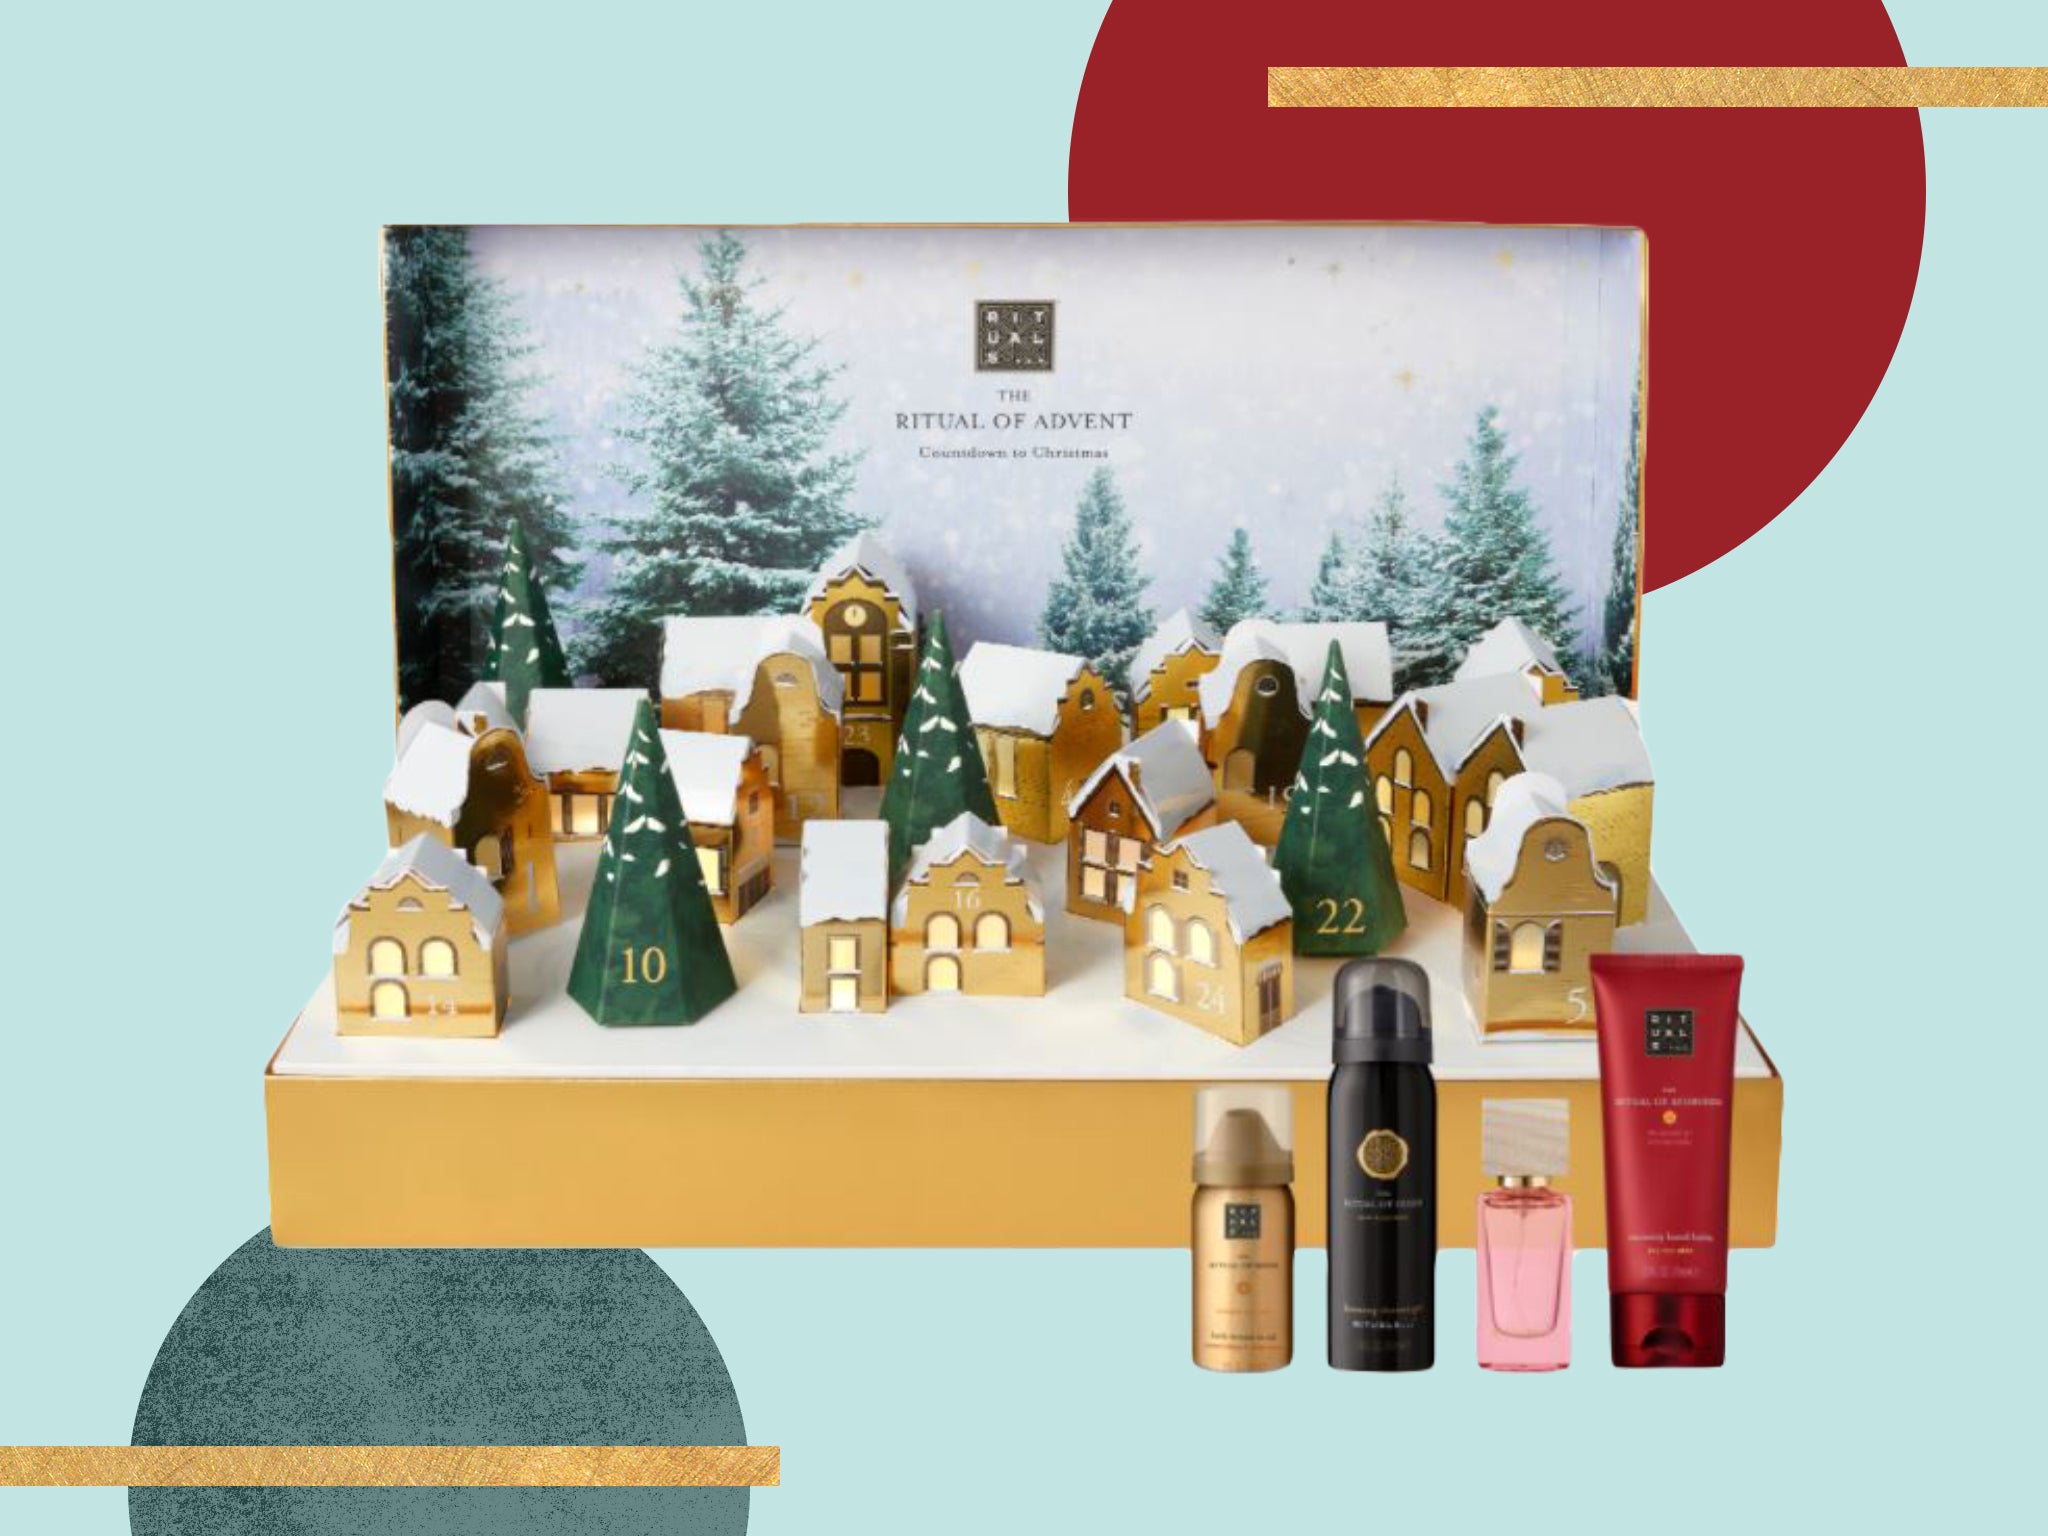 With 24 goodies hiding inside little houses and trees, it costs £89.90 and has a total worth of £150